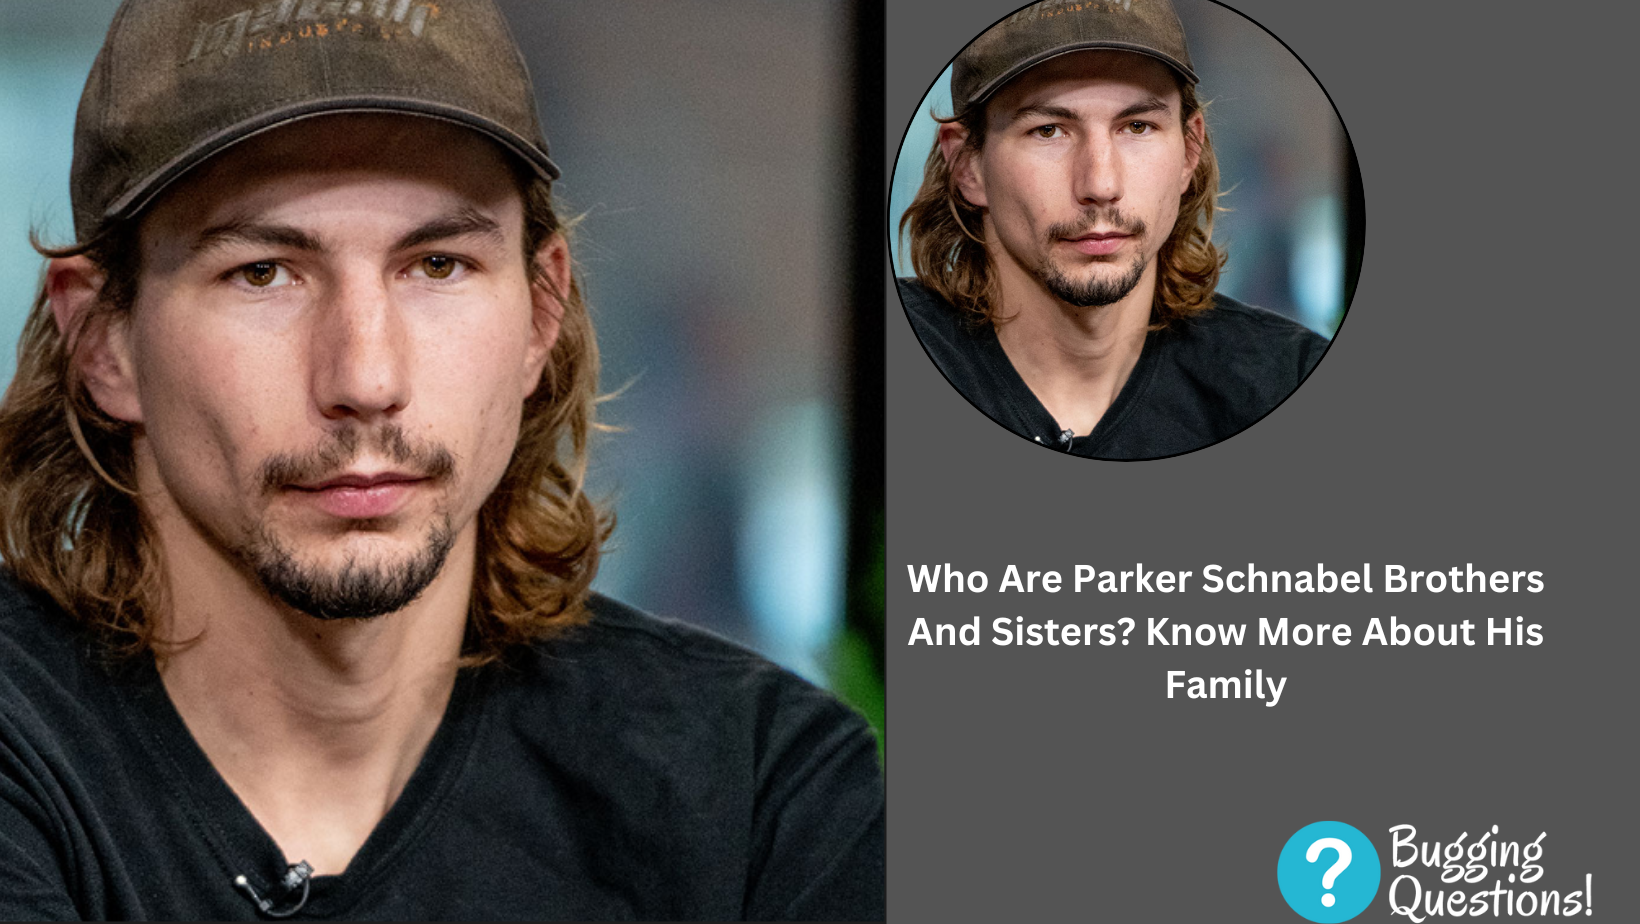 Who Are Parker Schnabel Brothers And Sisters?